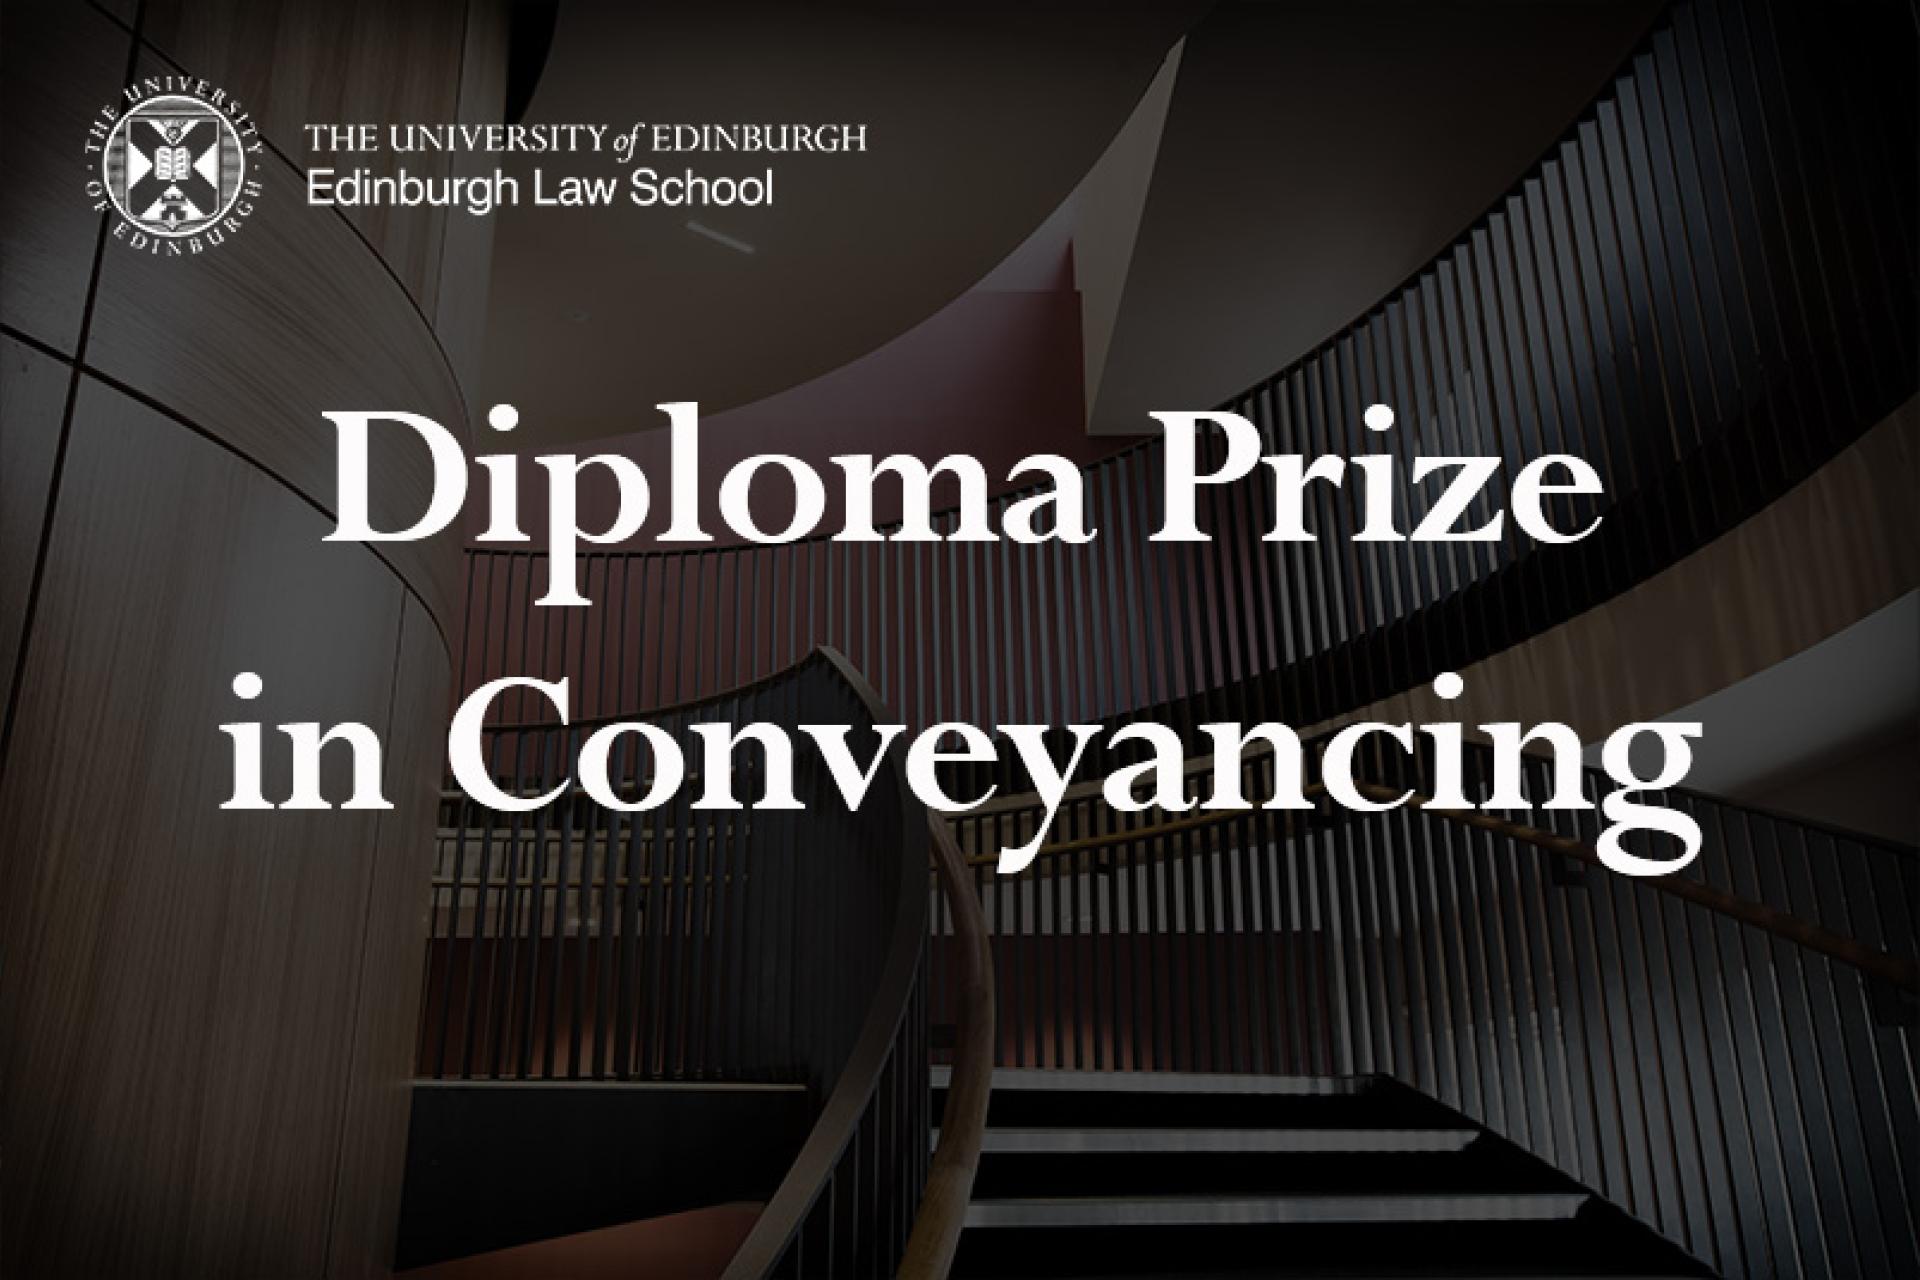 Diploma Prize in Conveyancing